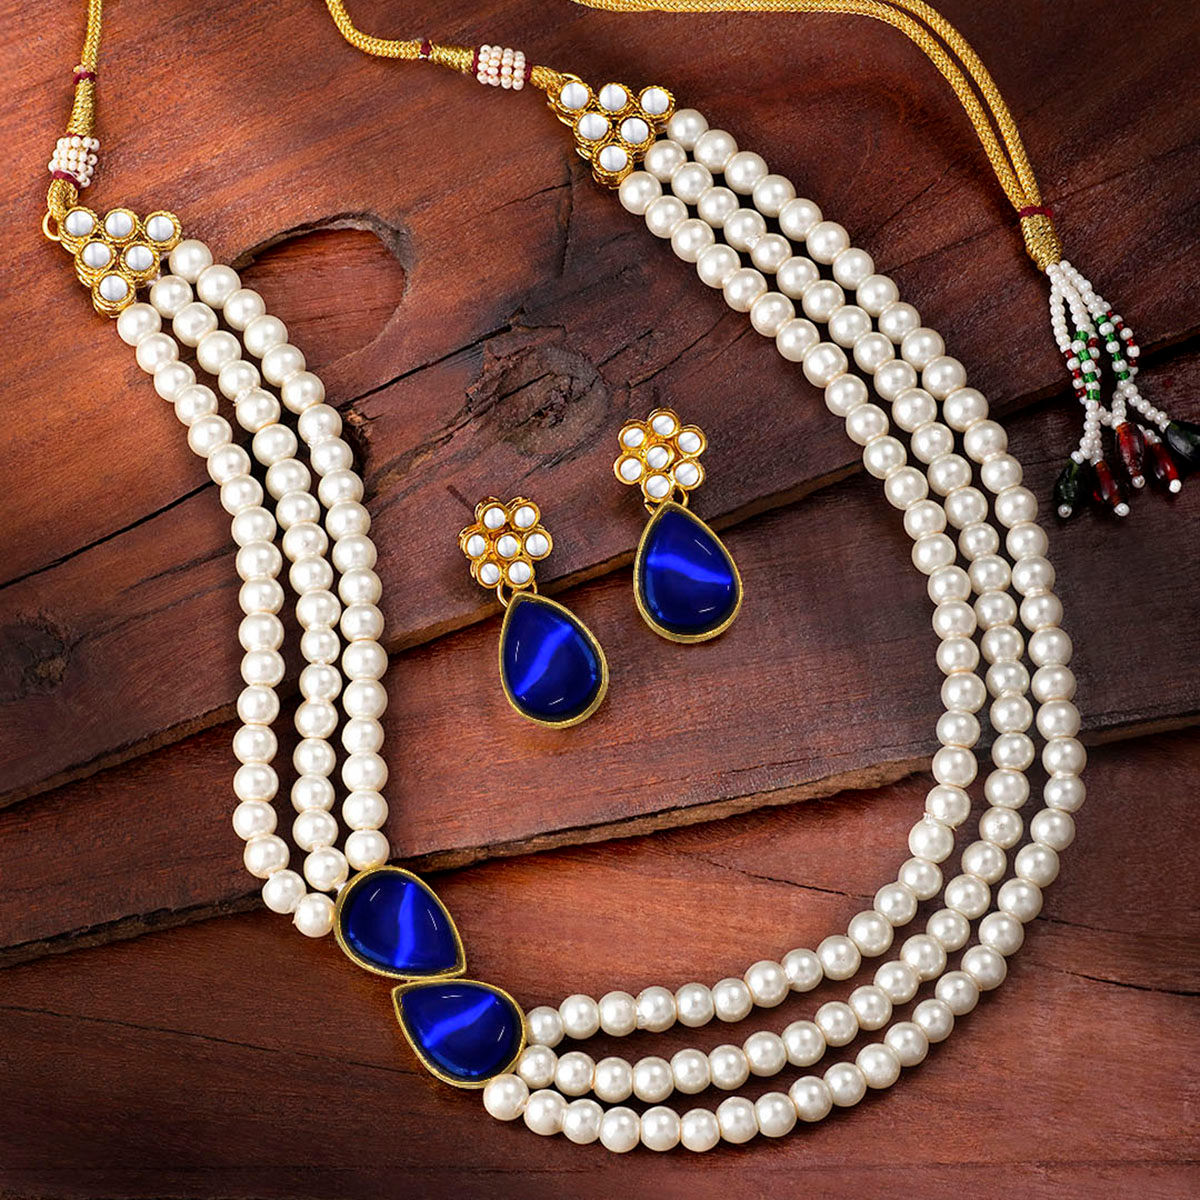 Wholesale New Cheap High Quality Shiny Exquisite Zircon Crystal Royal Blue  Necklace Earring Prom Jewelry Set From malibabacom